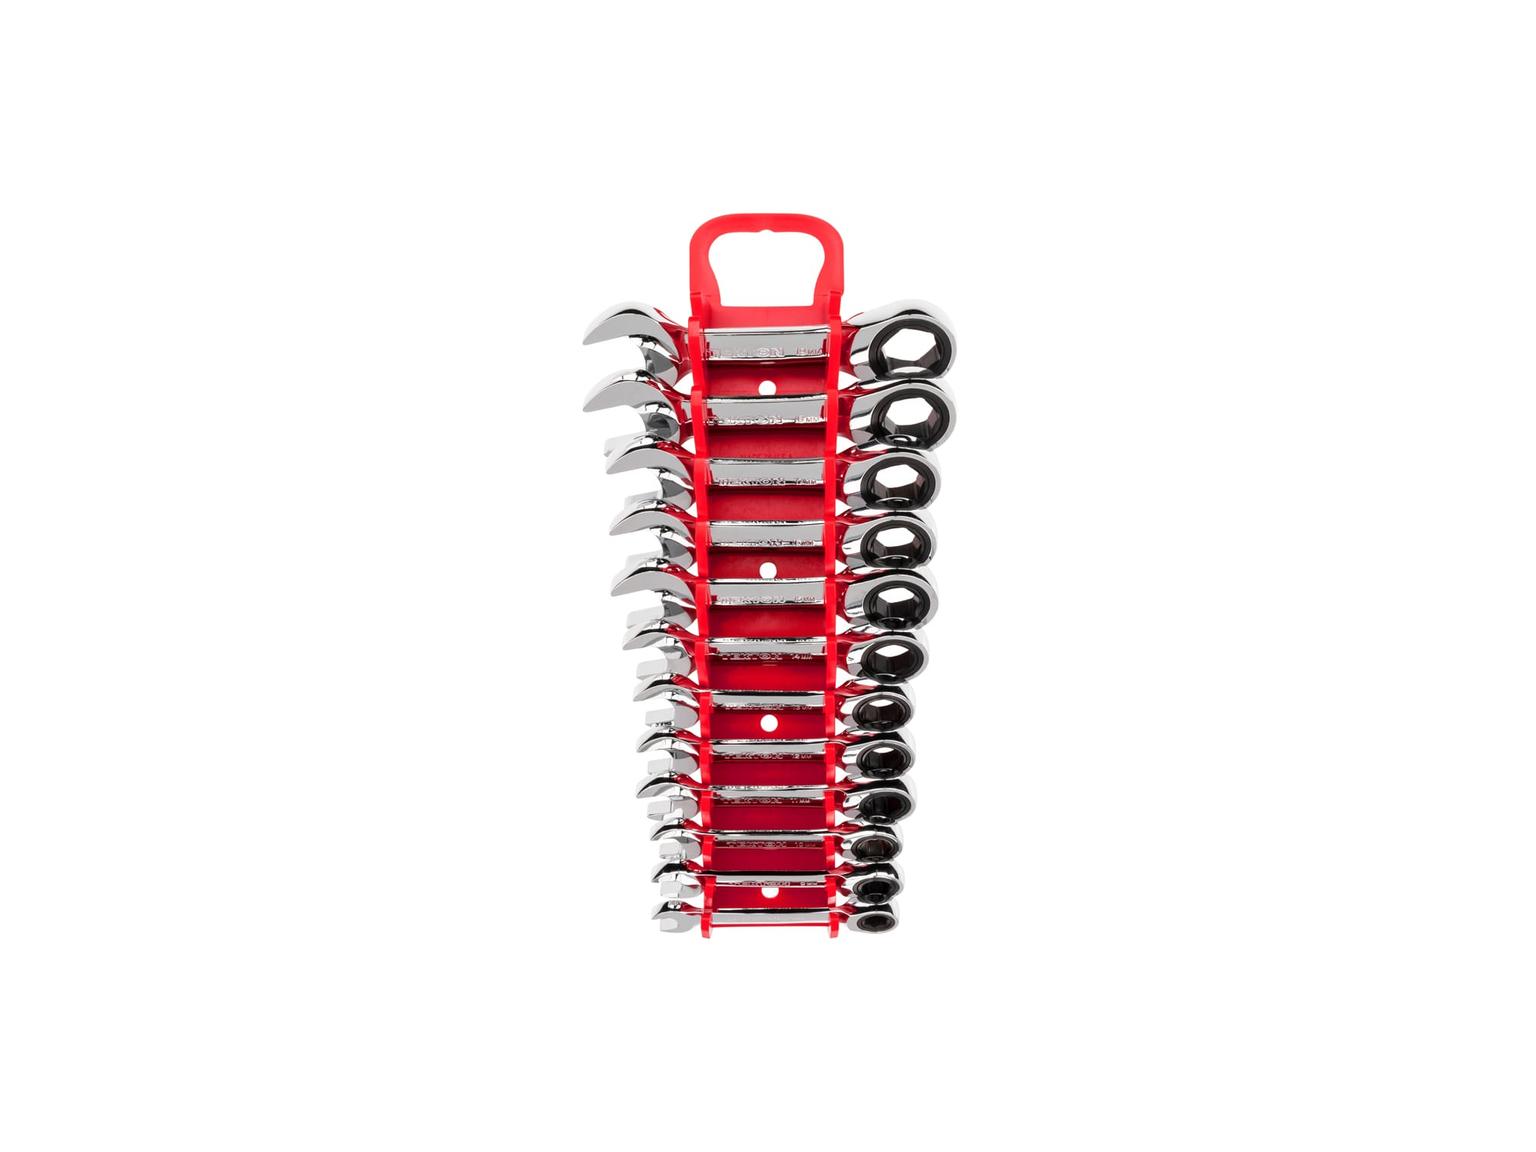 TEKTON WRN50170-T Stubby Ratcheting Combination Wrench Set with Holder, 12-Piece (8-19 mm)